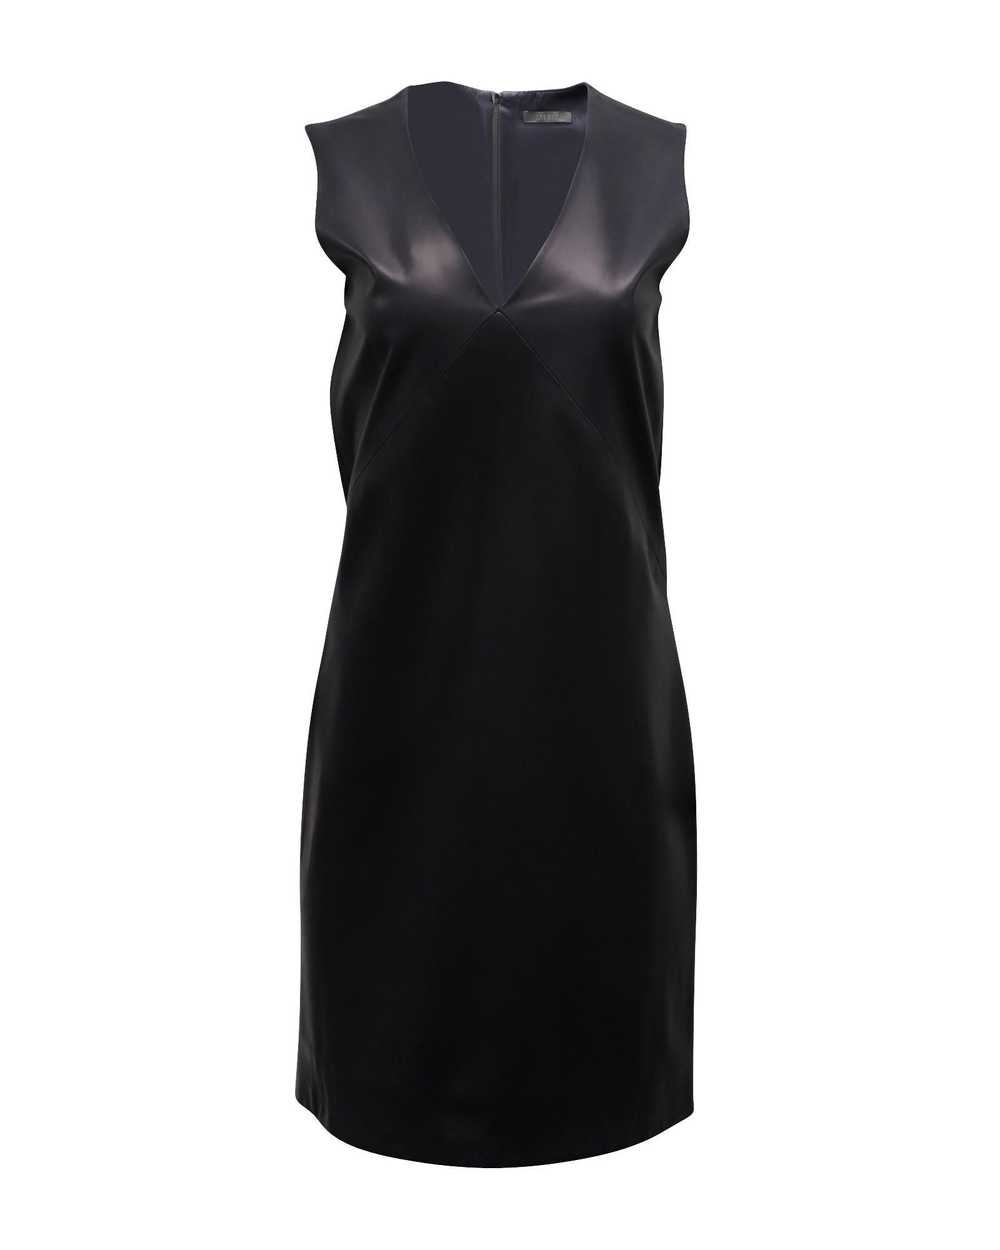 The Row Black Leather V-Neck Mini Dress by The Row - image 1